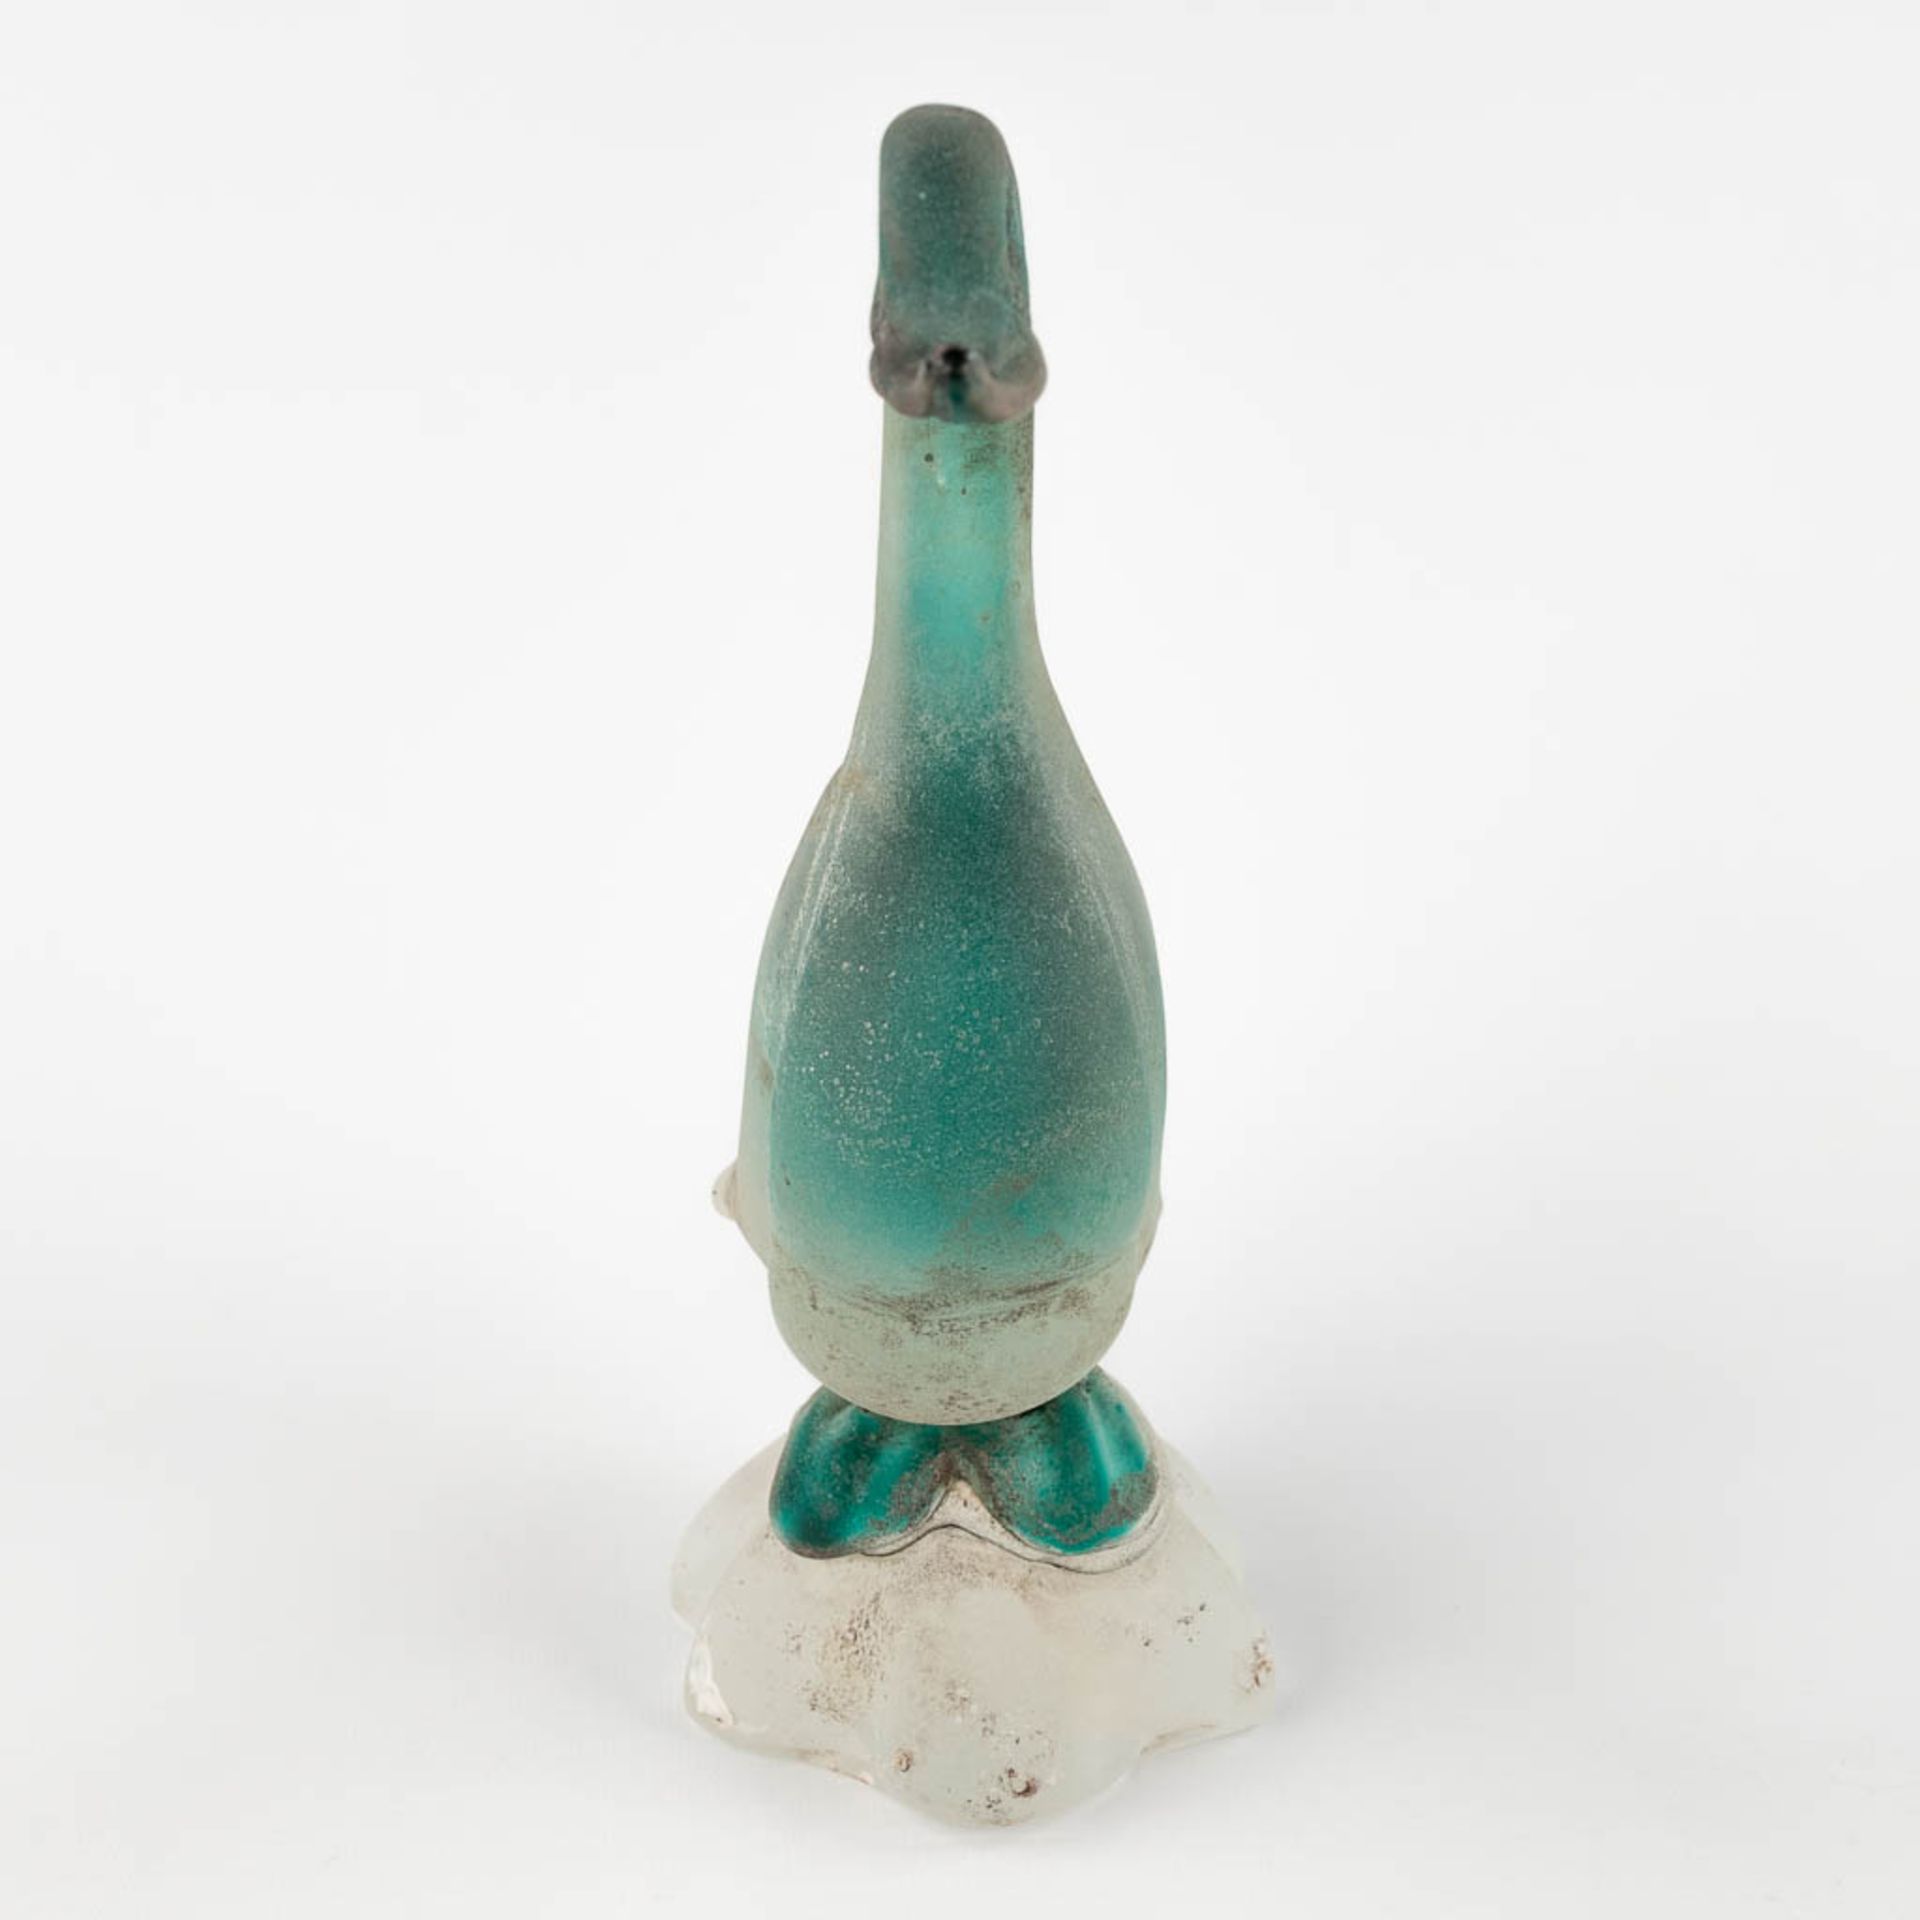 Two ducks, glass, Murano, Italy. Cenedese. (D:12 x W:30 x H:10 cm) - Image 13 of 17